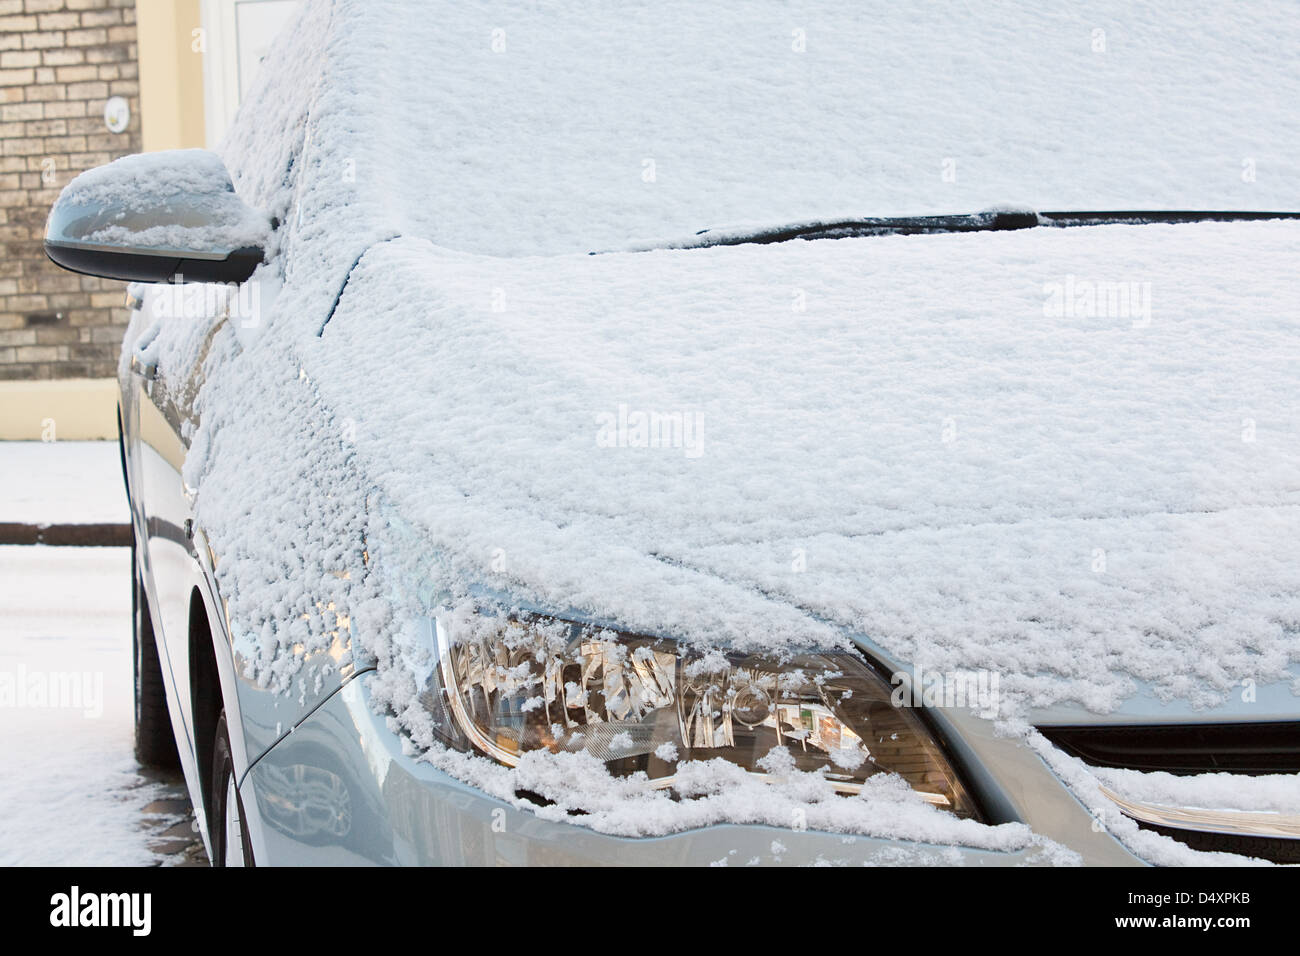 front bonnet and lights of european car covered in a layer of fresh snow during a harsh winter season Stock Photo